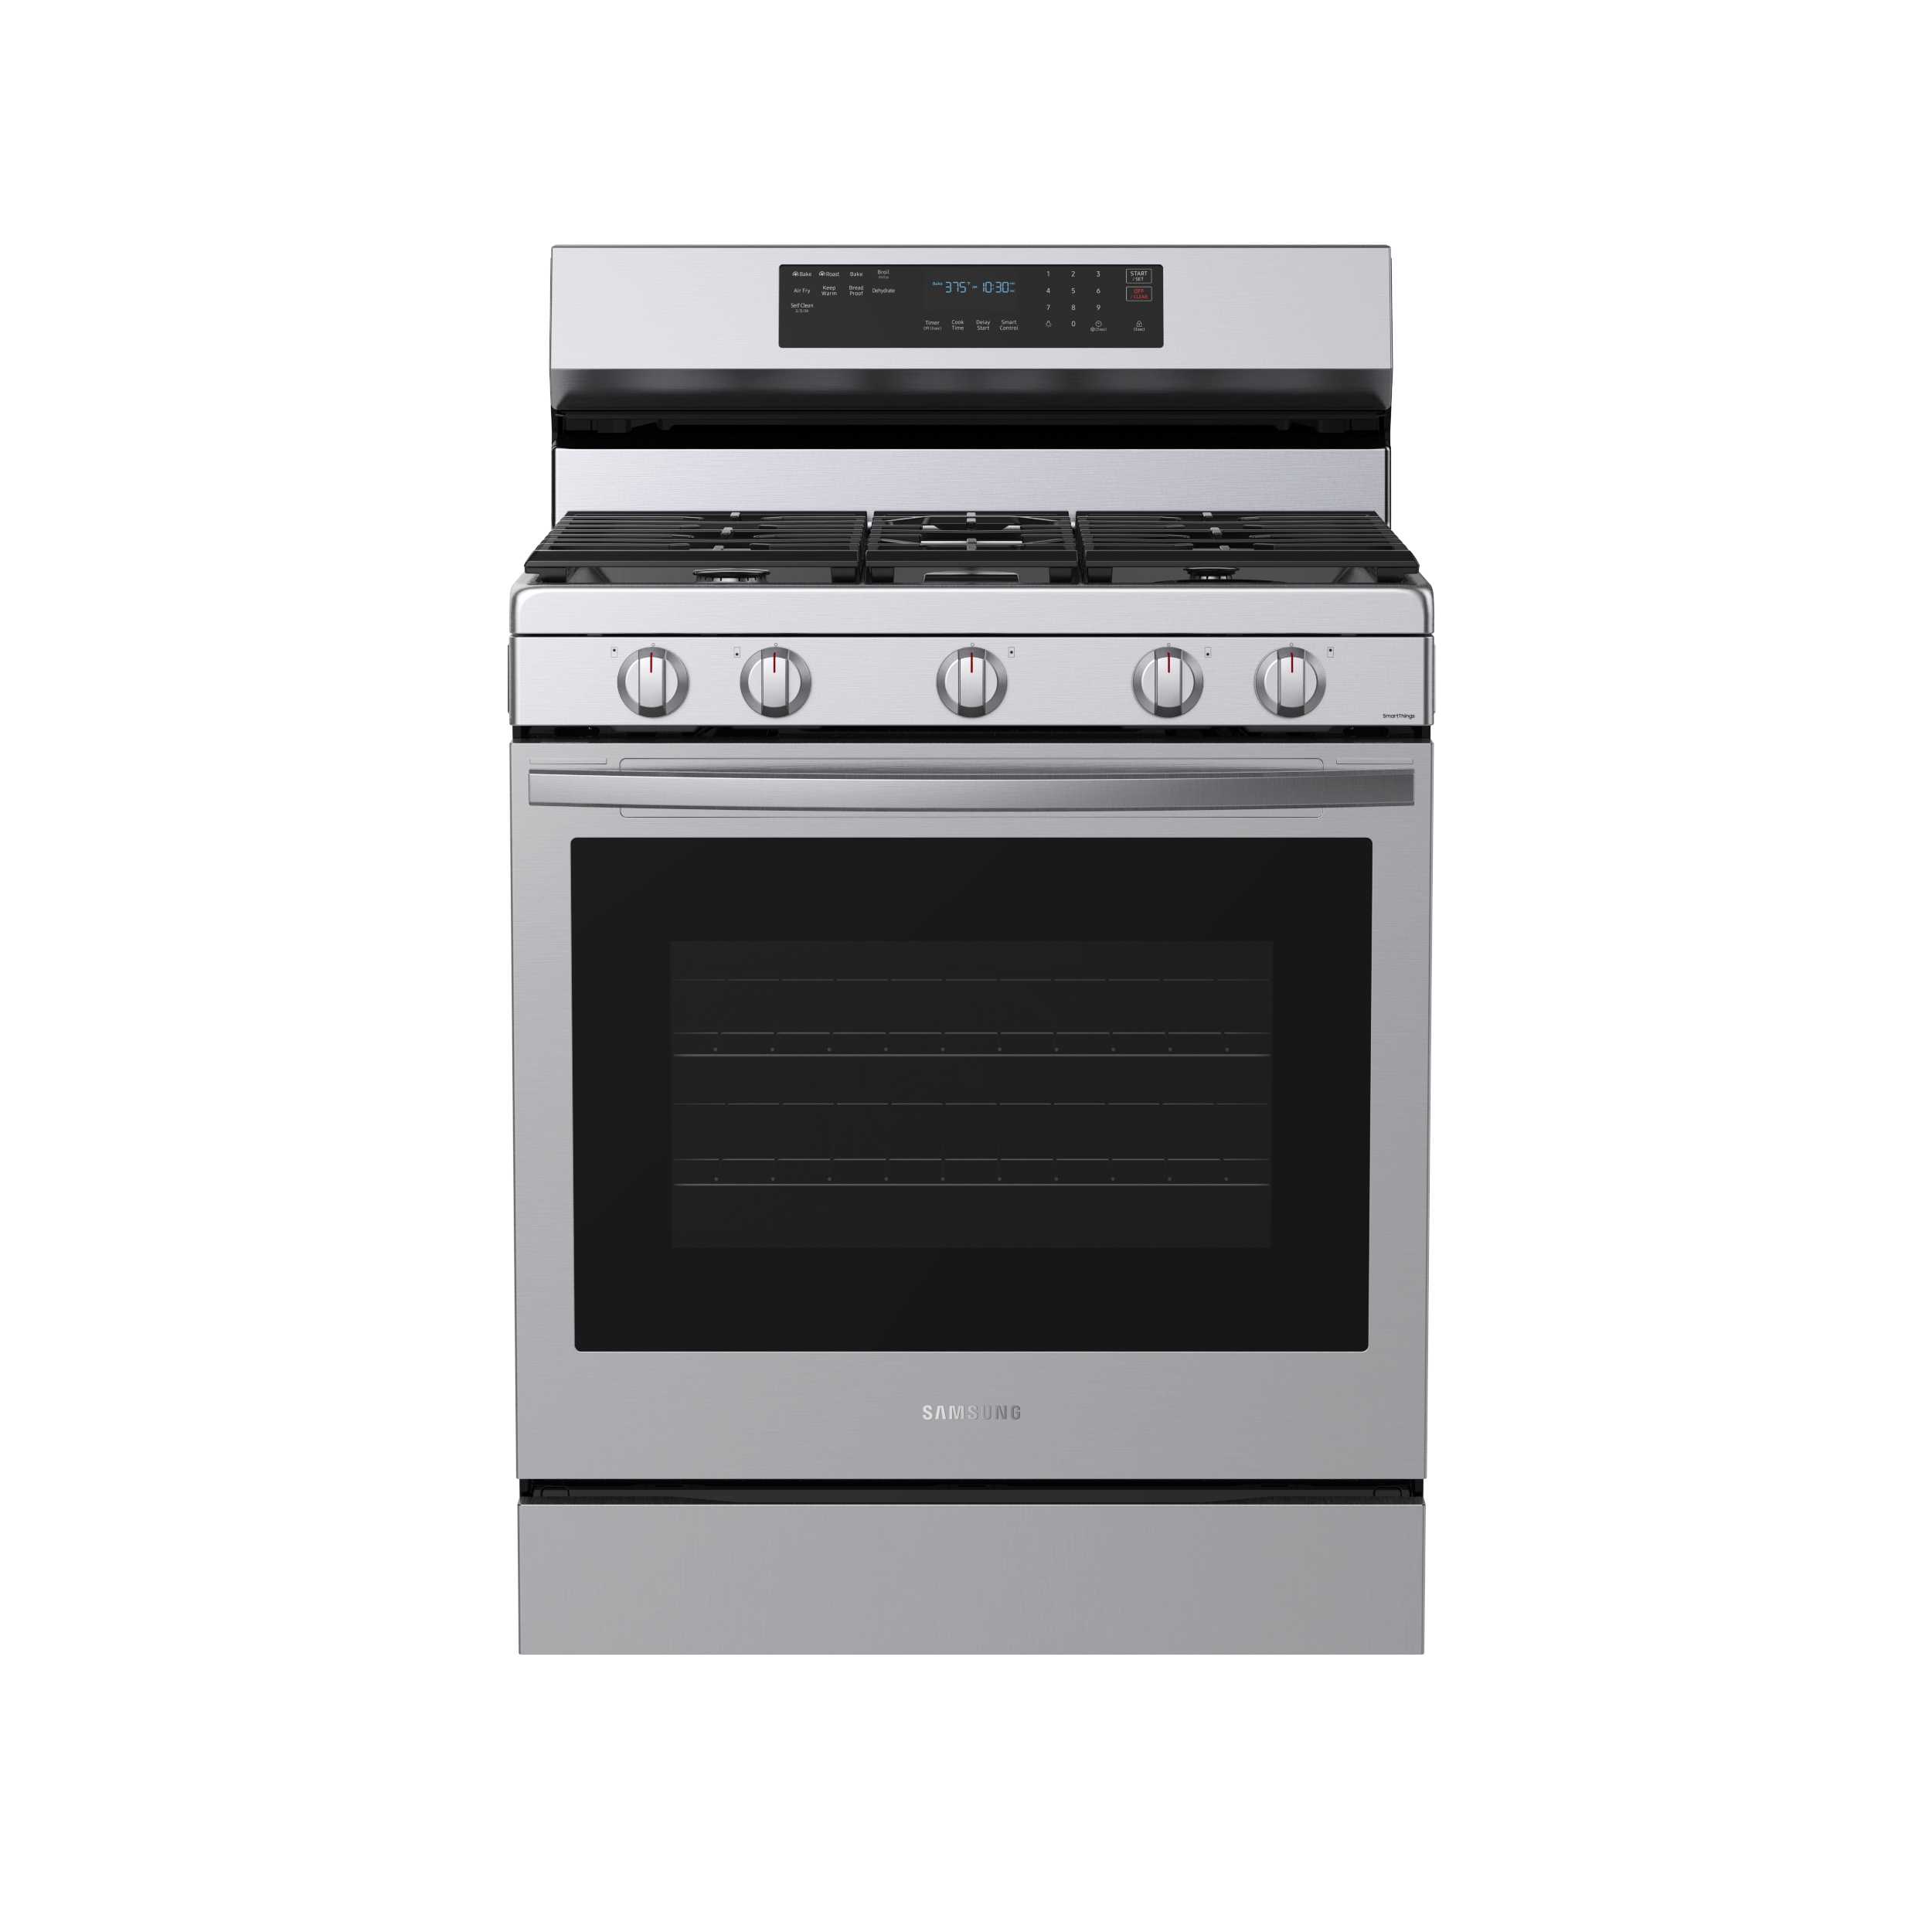 6.0 cu. ft. Smart Freestanding Gas Range with No-Preheat Air Fry,  Convection+ & Stainless Cooktop in Stainless Steel Ranges - NX60A6711SS/AA